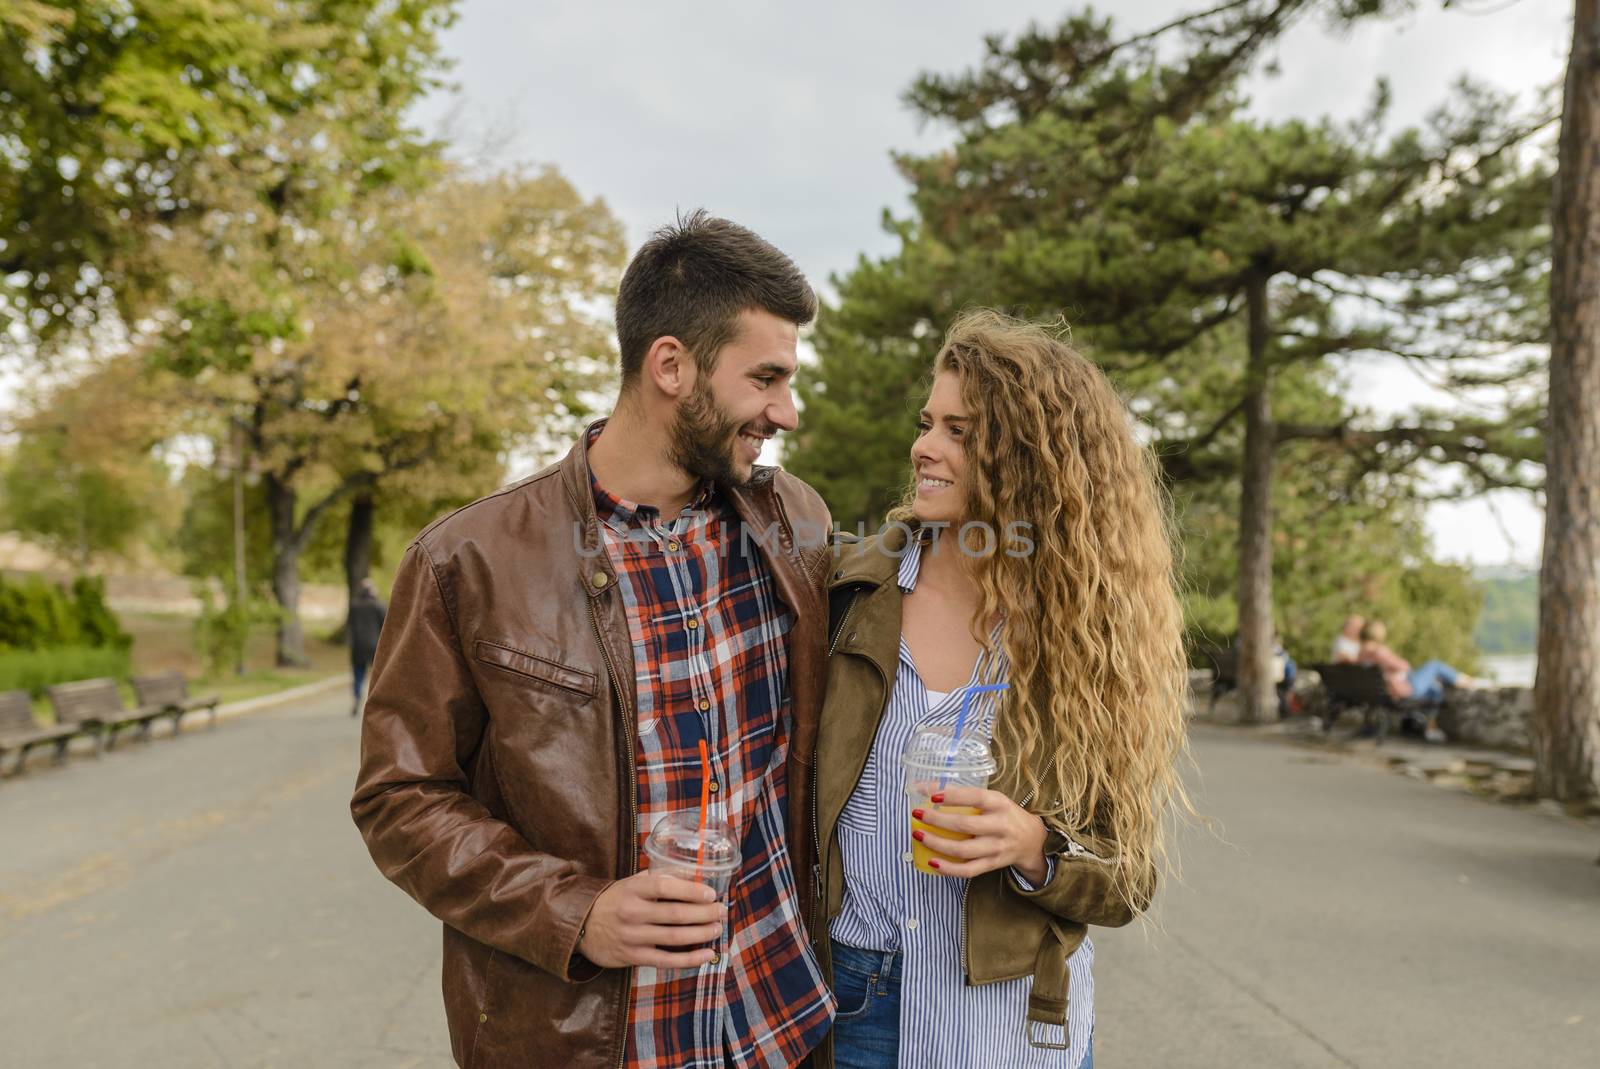 Attractive couple is refreshing with juice in the public park while smiling at each other